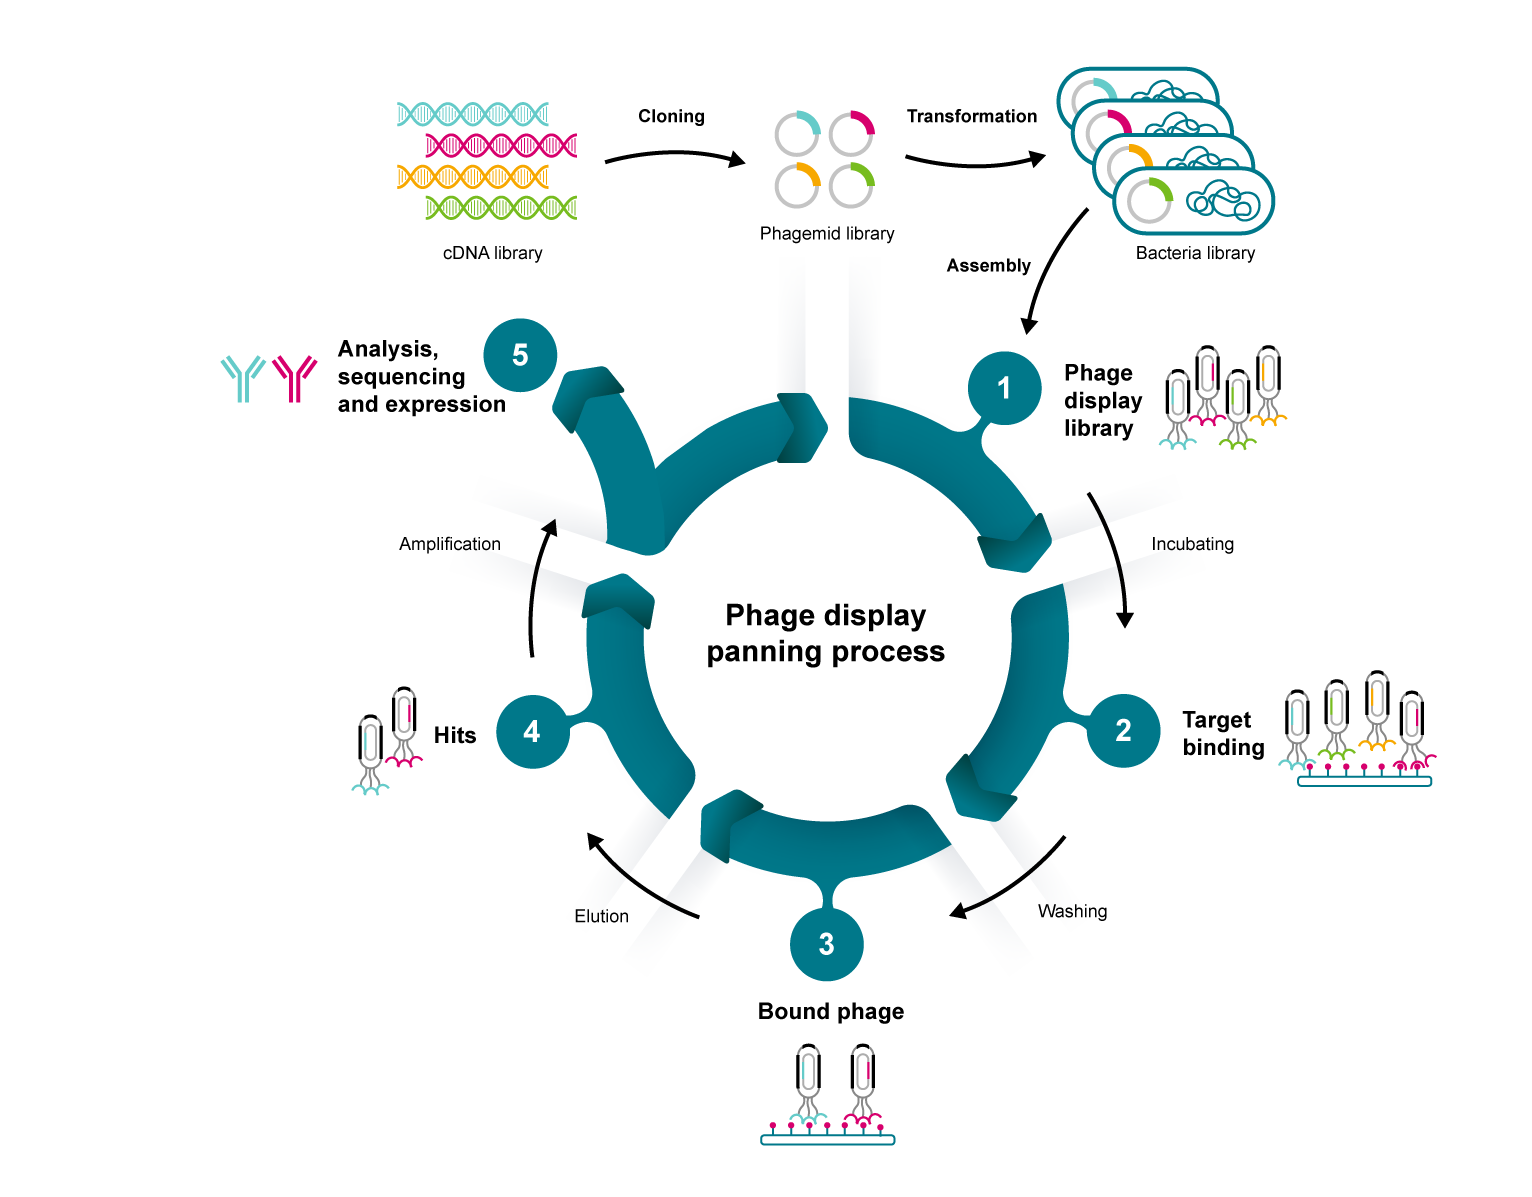 The panning process for phage display